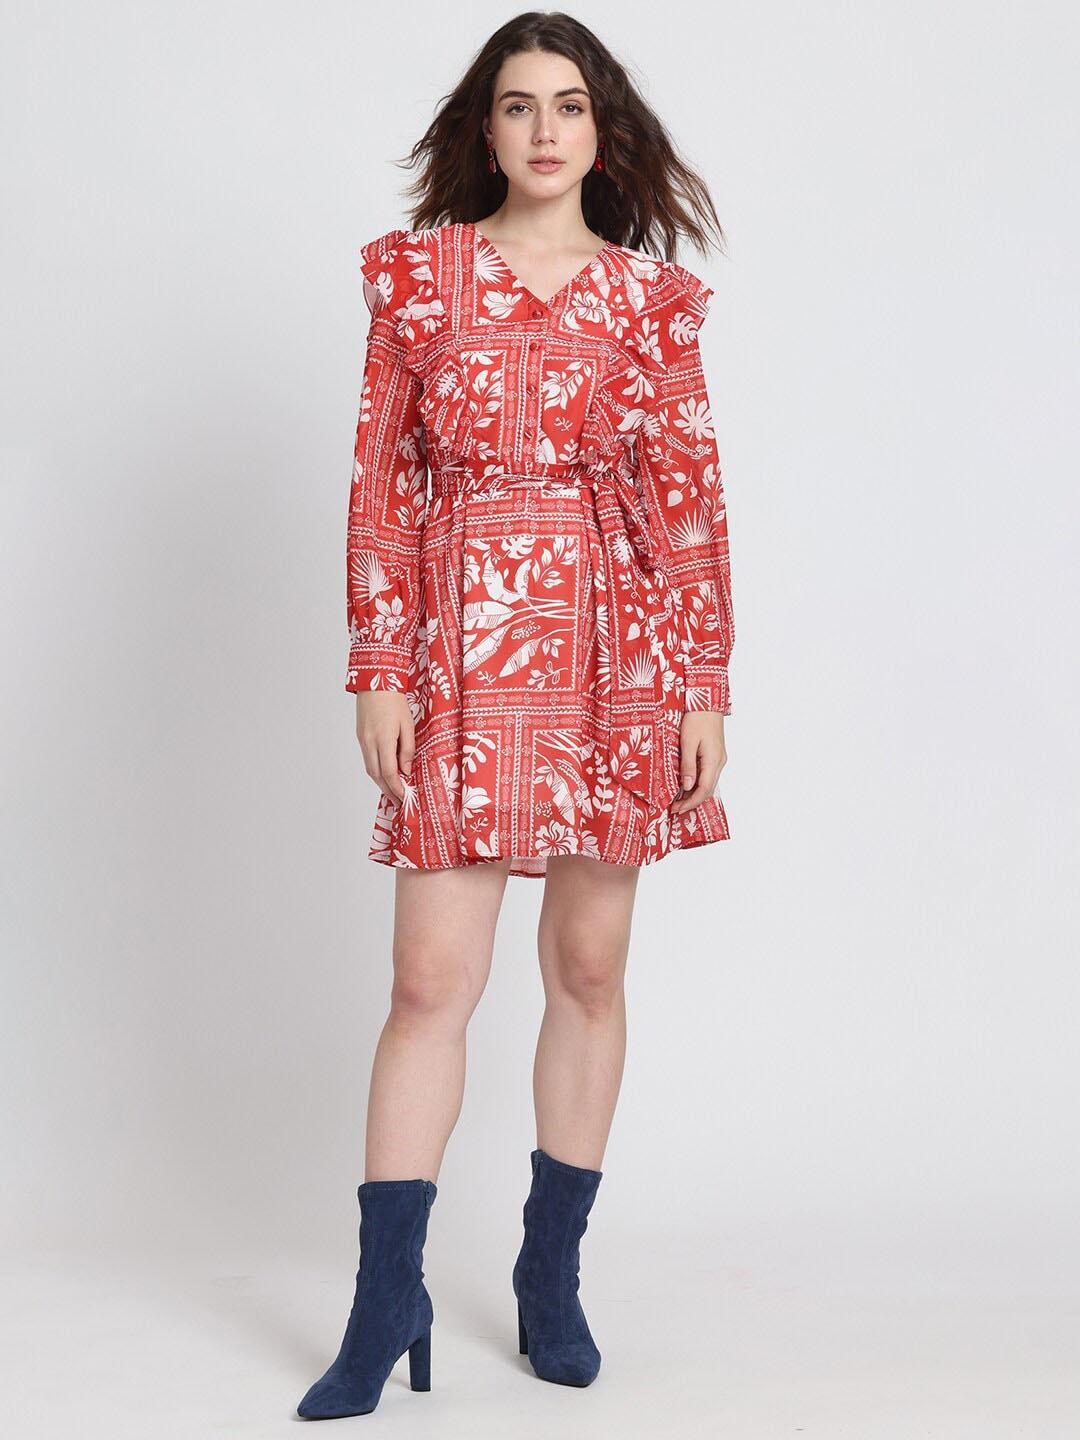 shaye-floral-printed-v-neck-cuffed-sleeve-ruffled-&-belted-georgette-fit-&-flare-dress